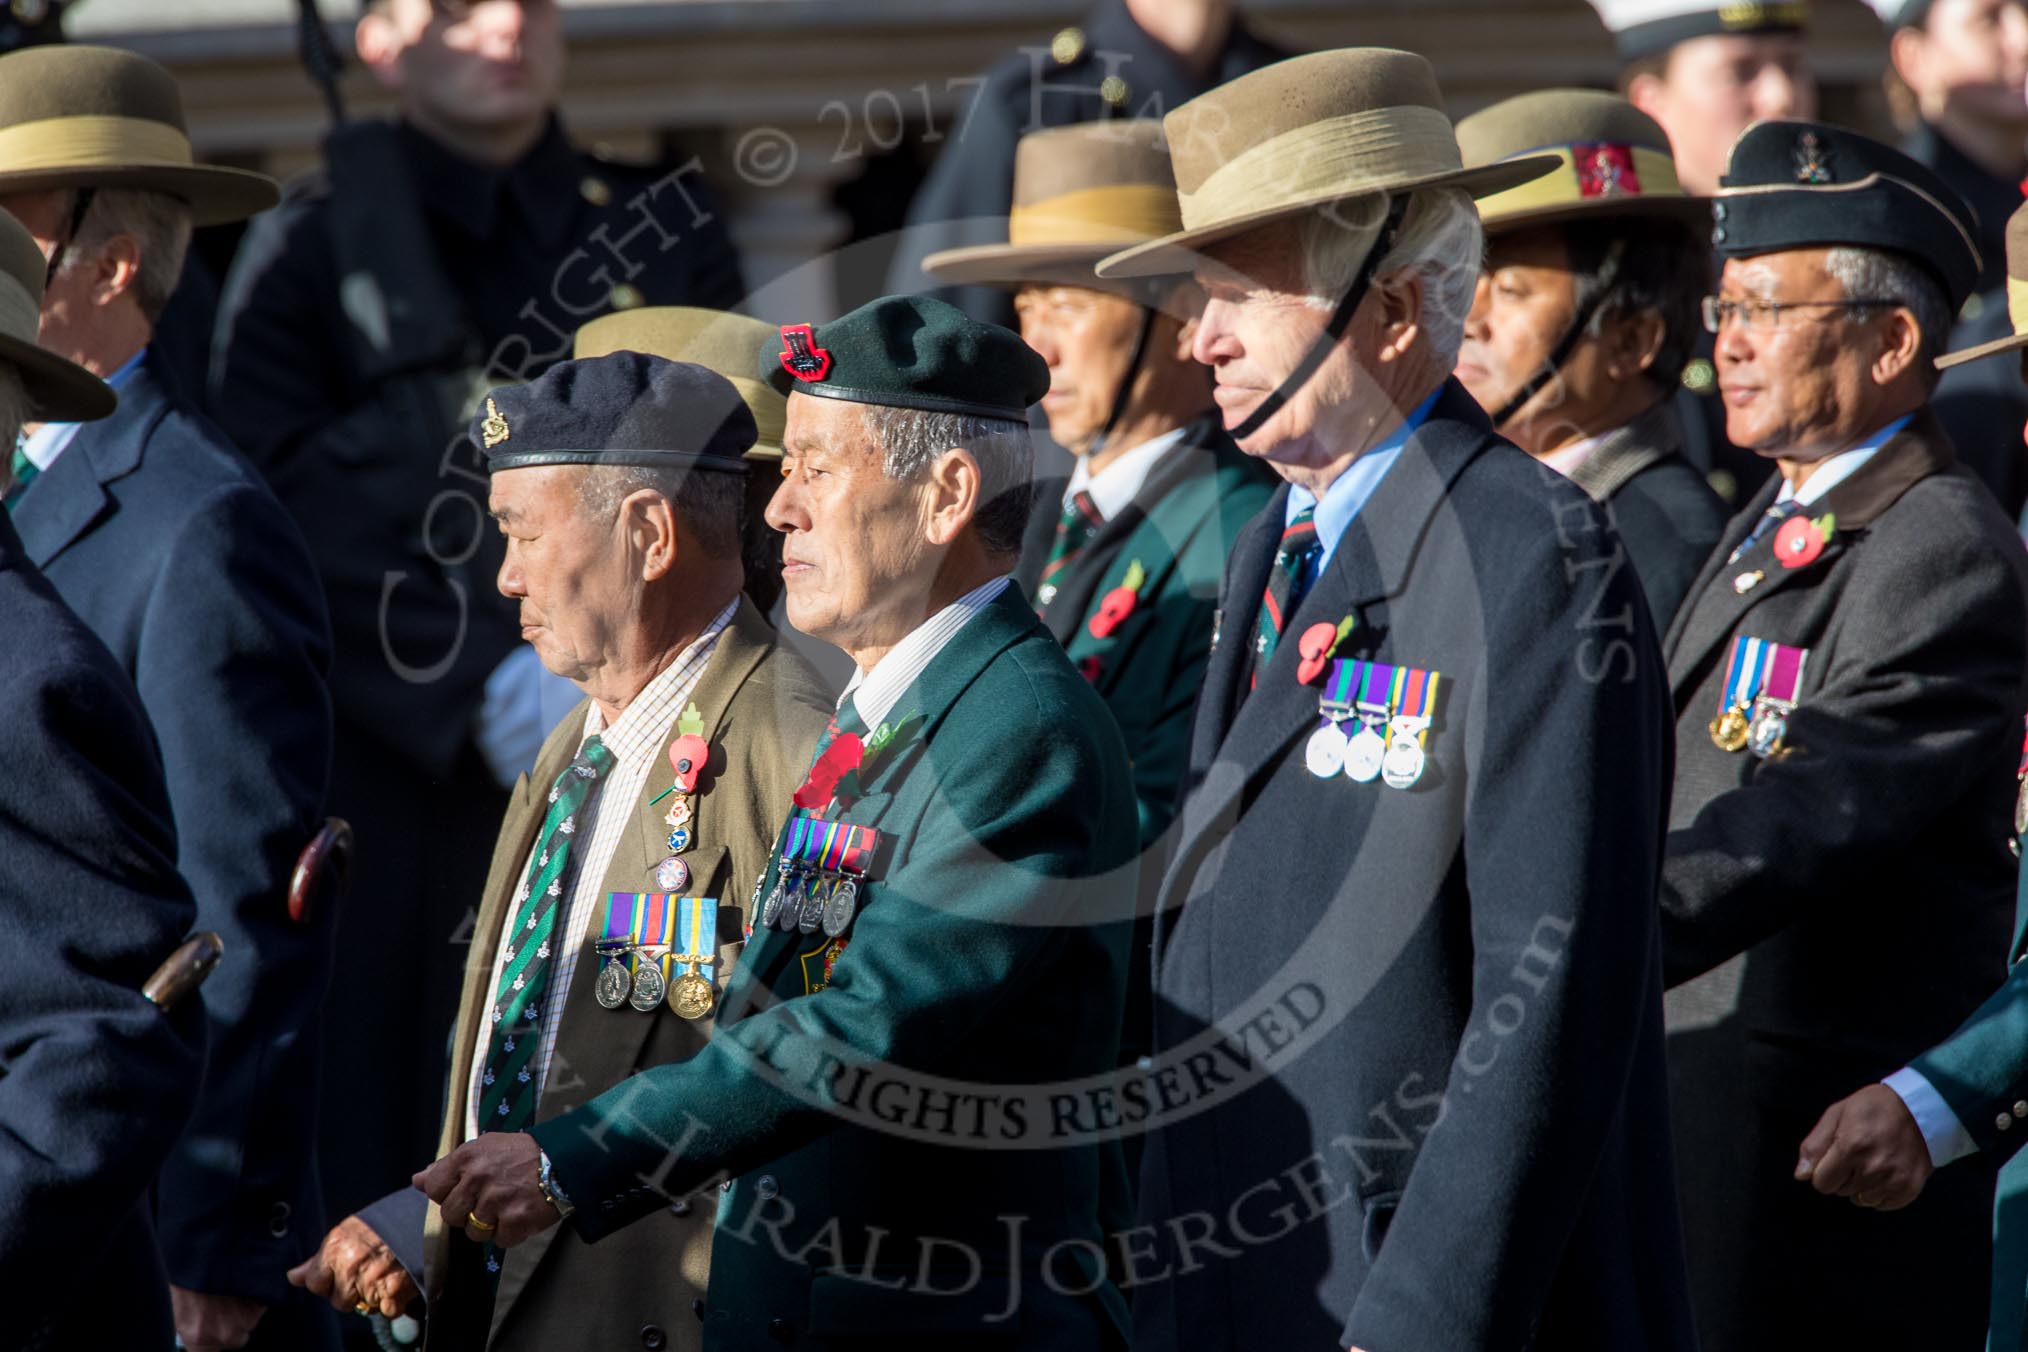 Gurkha Brigade Association (Group A25, 80 members) during the Royal British Legion March Past on Remembrance Sunday at the Cenotaph, Whitehall, Westminster, London, 11 November 2018, 12:00.